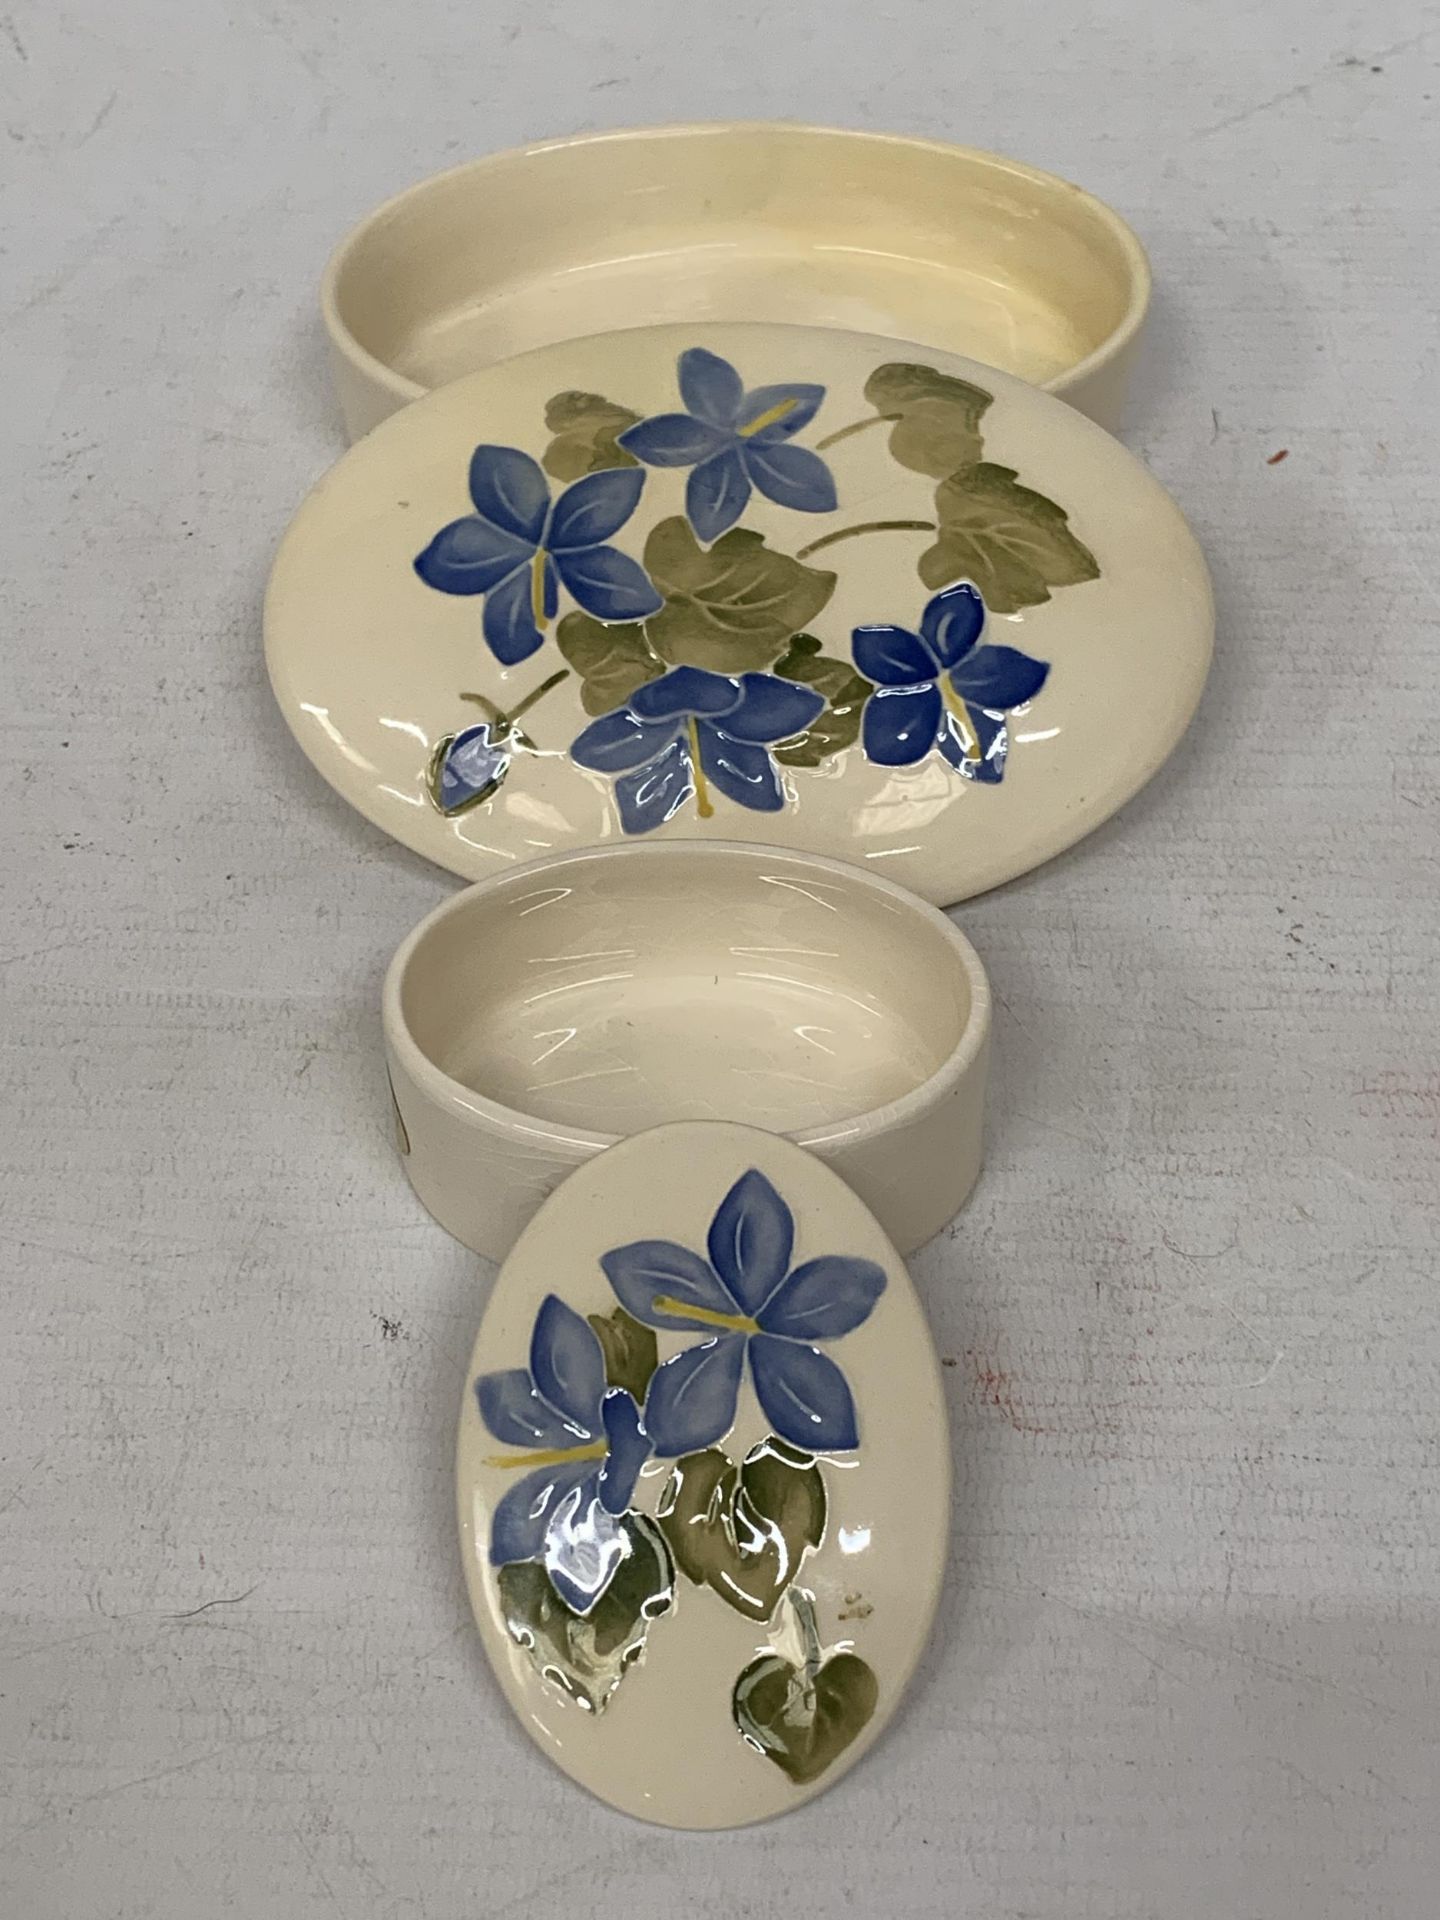 TWO SMALL UNMARKED MOORCROFT CAMPANULA OVAL TRINKET BOXES - Image 2 of 3